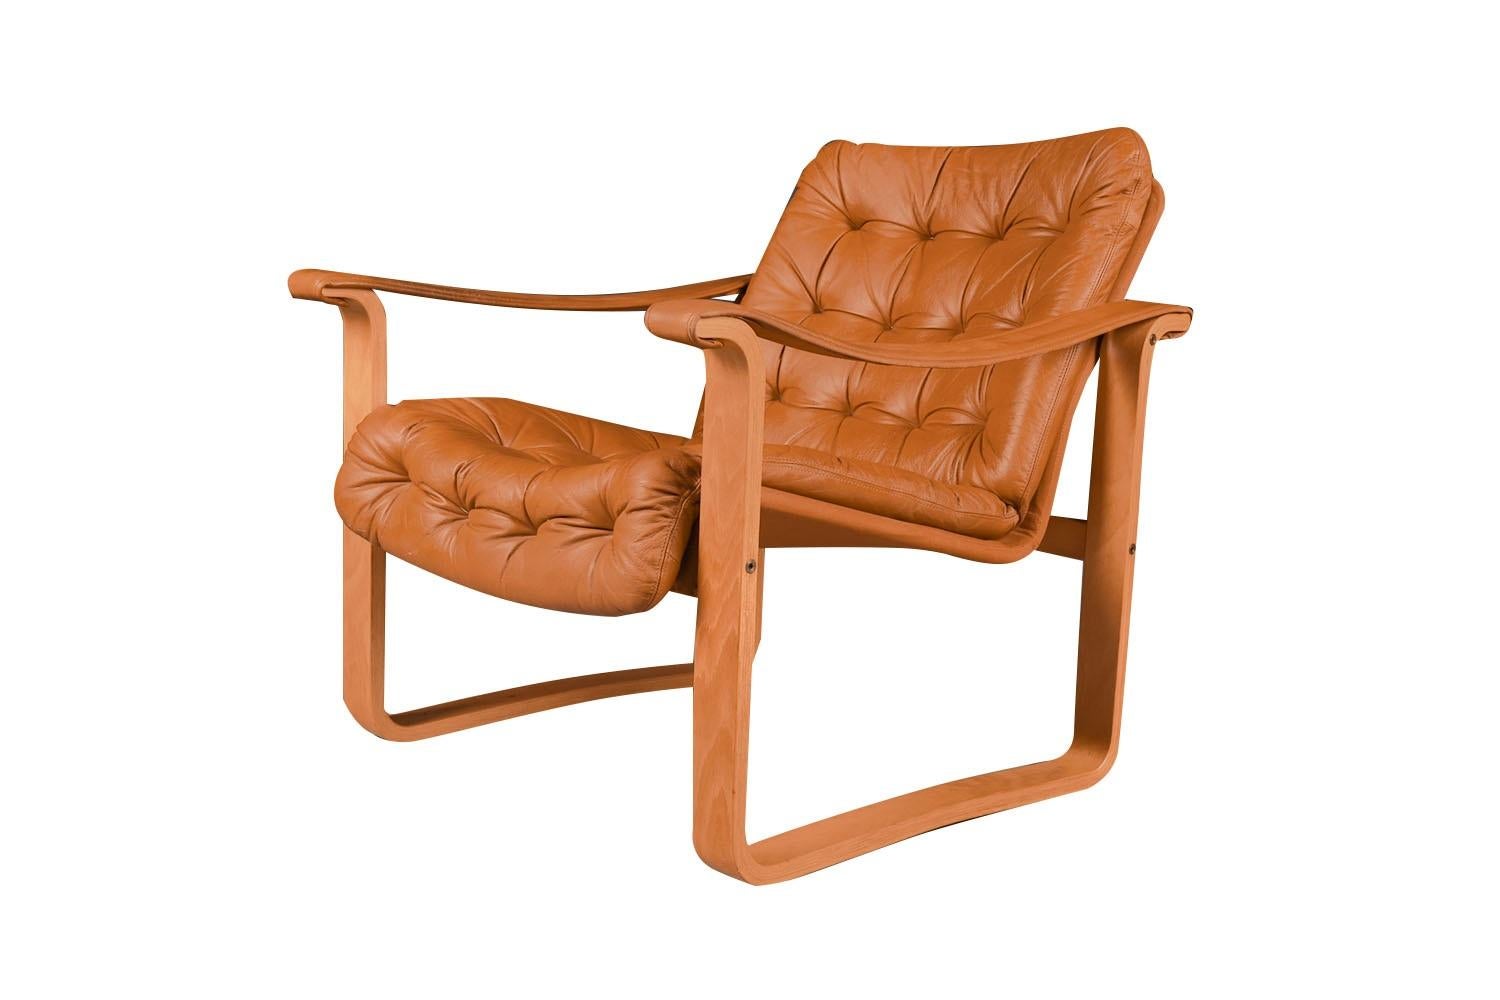 A beautiful Mid-Century Modern, stylish leather lounge, armchair by OY BJ. Dahlqvist AB for BD furniture Finland, circa 1960s. Features original rich, soft patinated light cognac leather upholstery, supported by a canvas back, and bentwood frame.